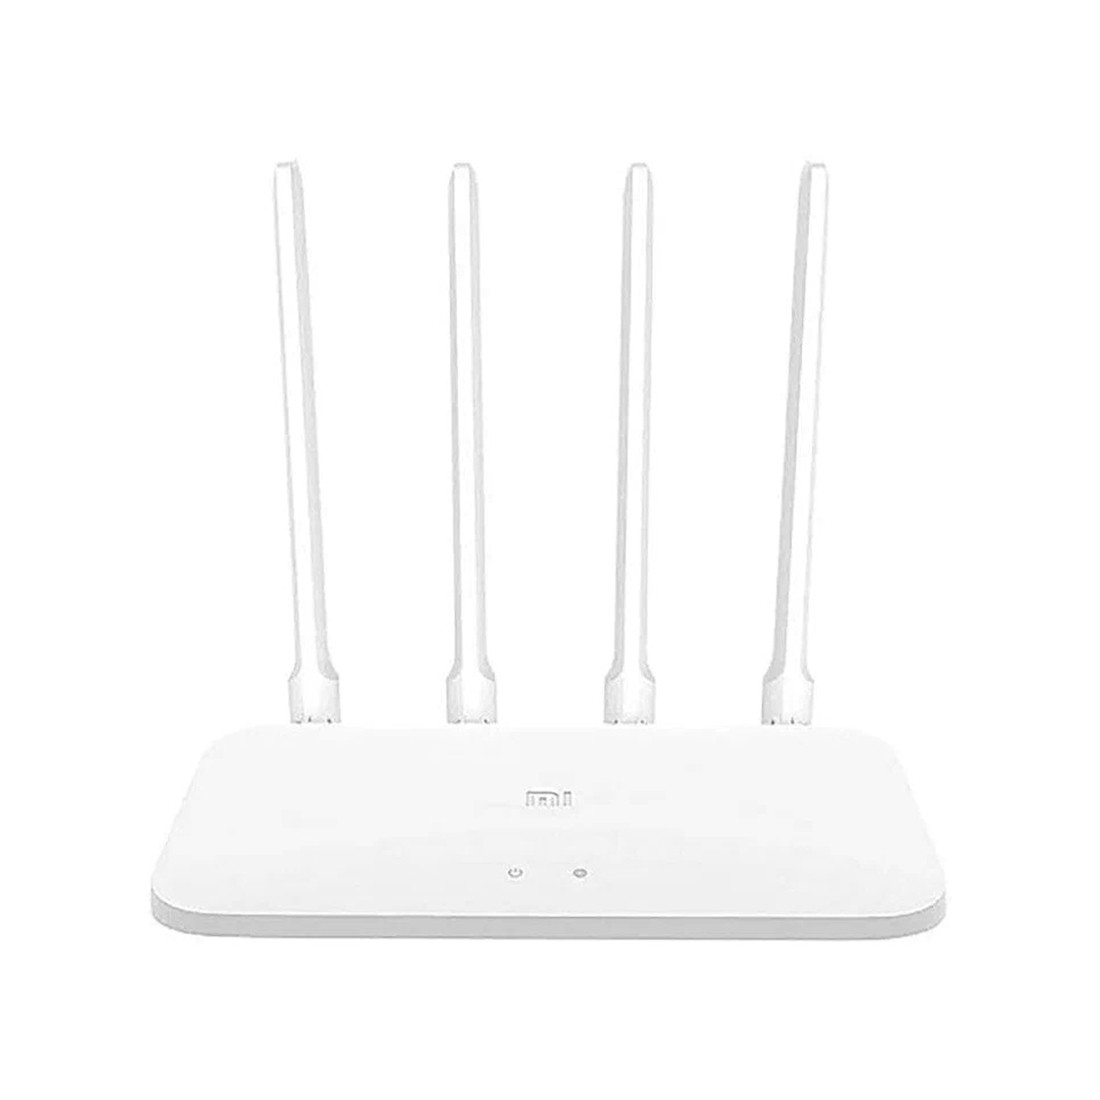 Маршрутизатор Xiaomi Router AC1200 - фото 2 - id-p110888028